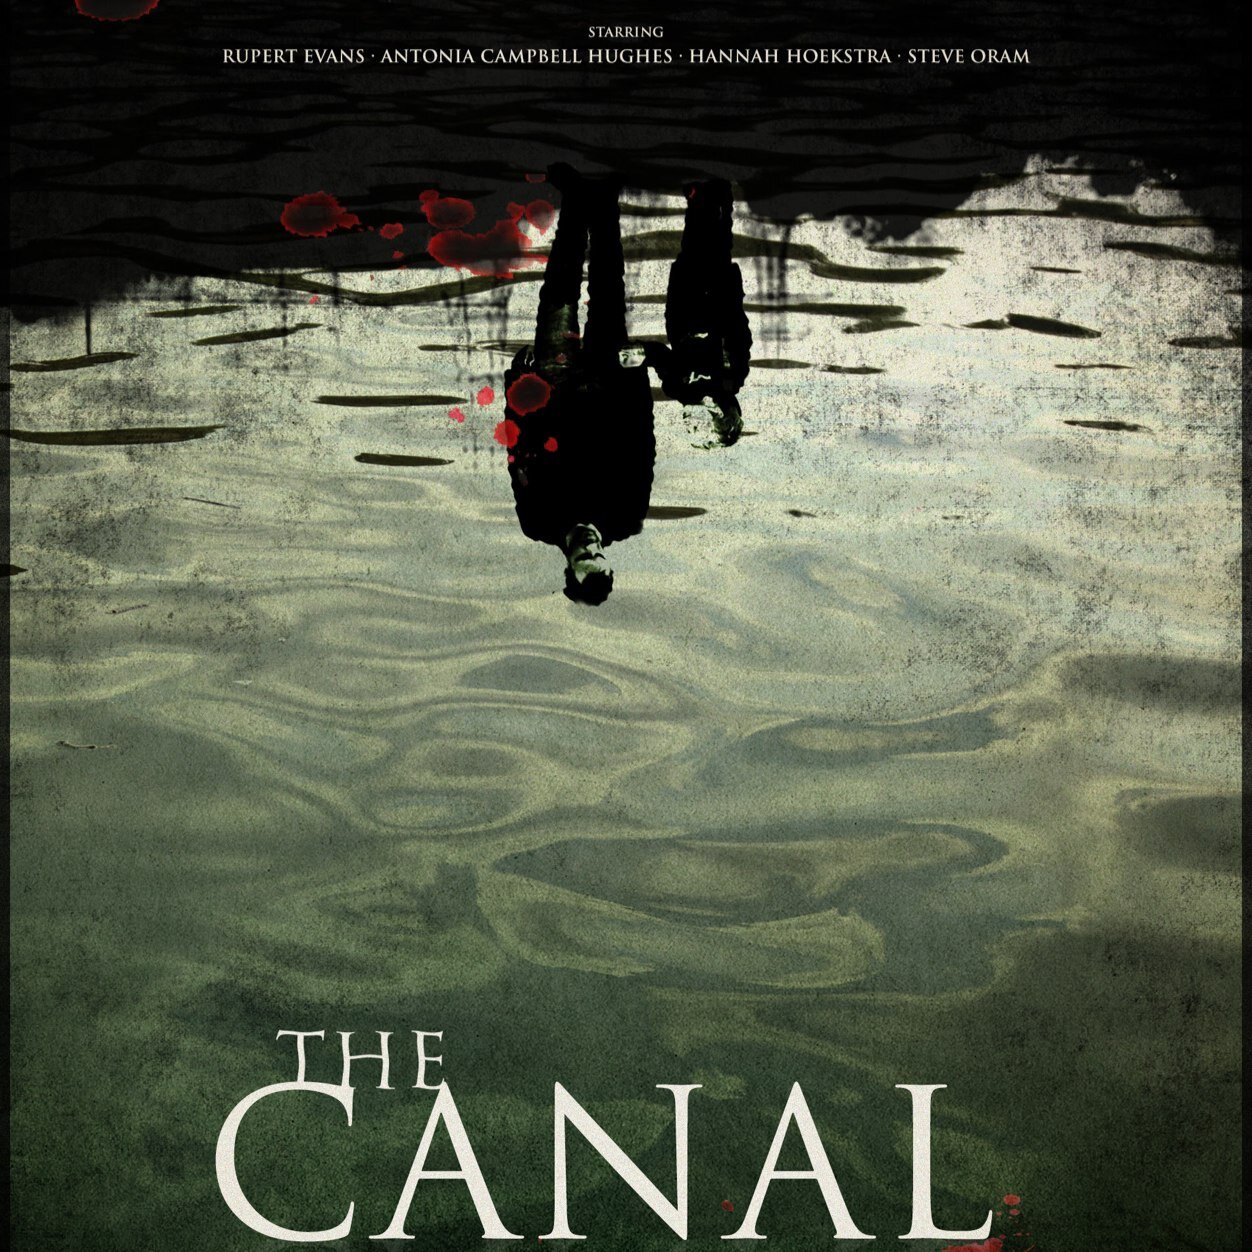 The Canal Interview - Ivan Kavanagh and Antonia Campbell Hughes